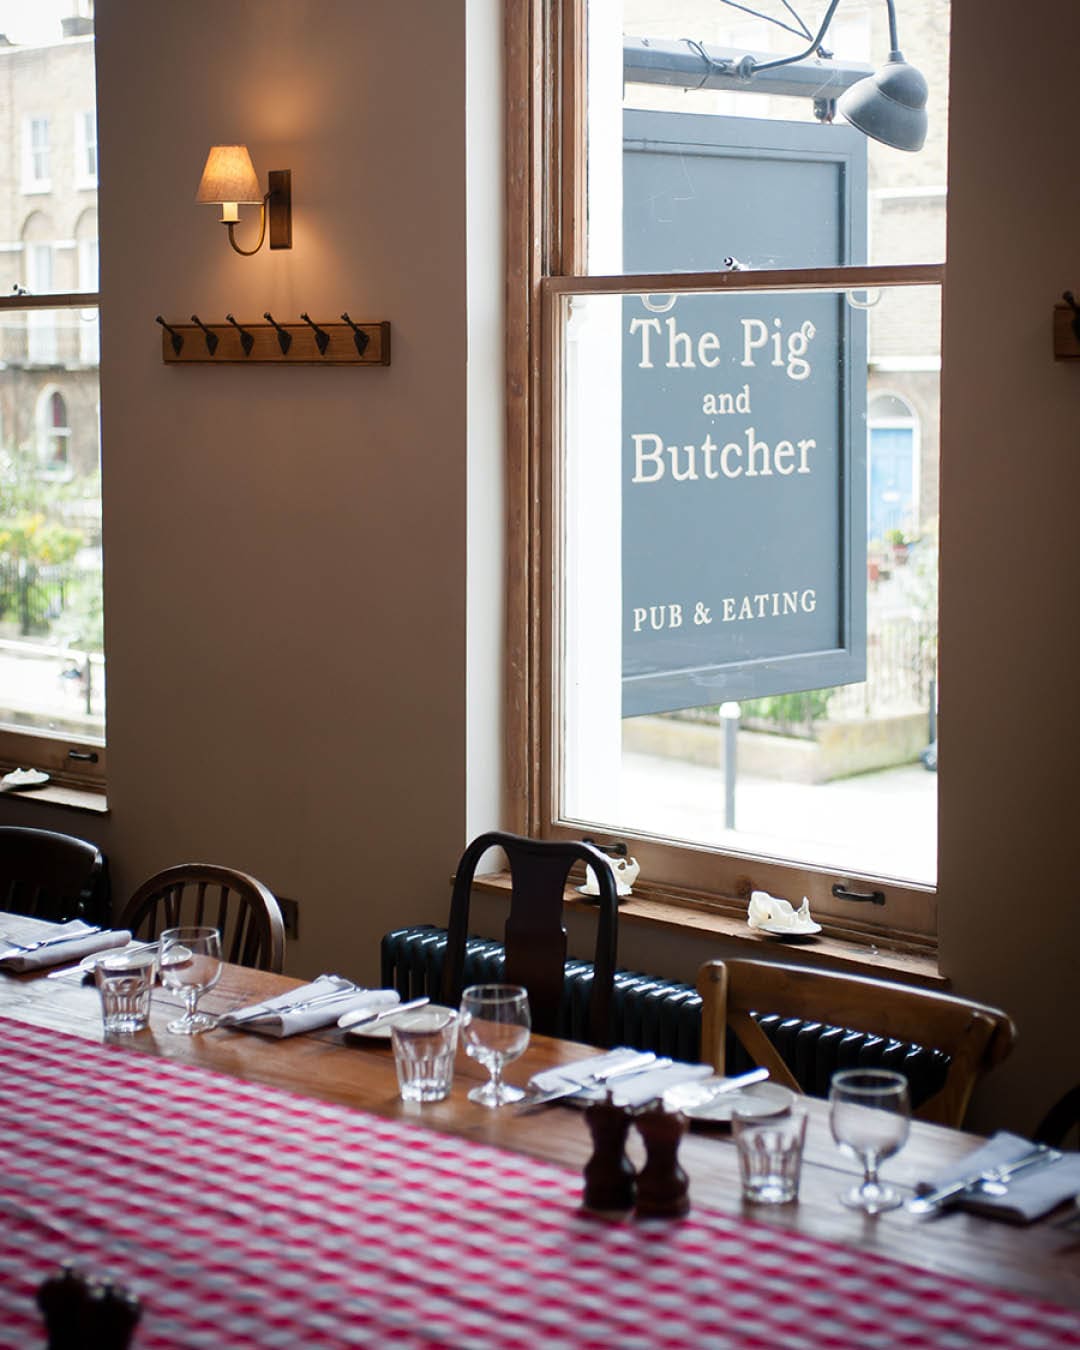 The best private dining rooms in London | The private dining room at The Pig & Butcher in Islington made snug with gingham table runners and warm lighting